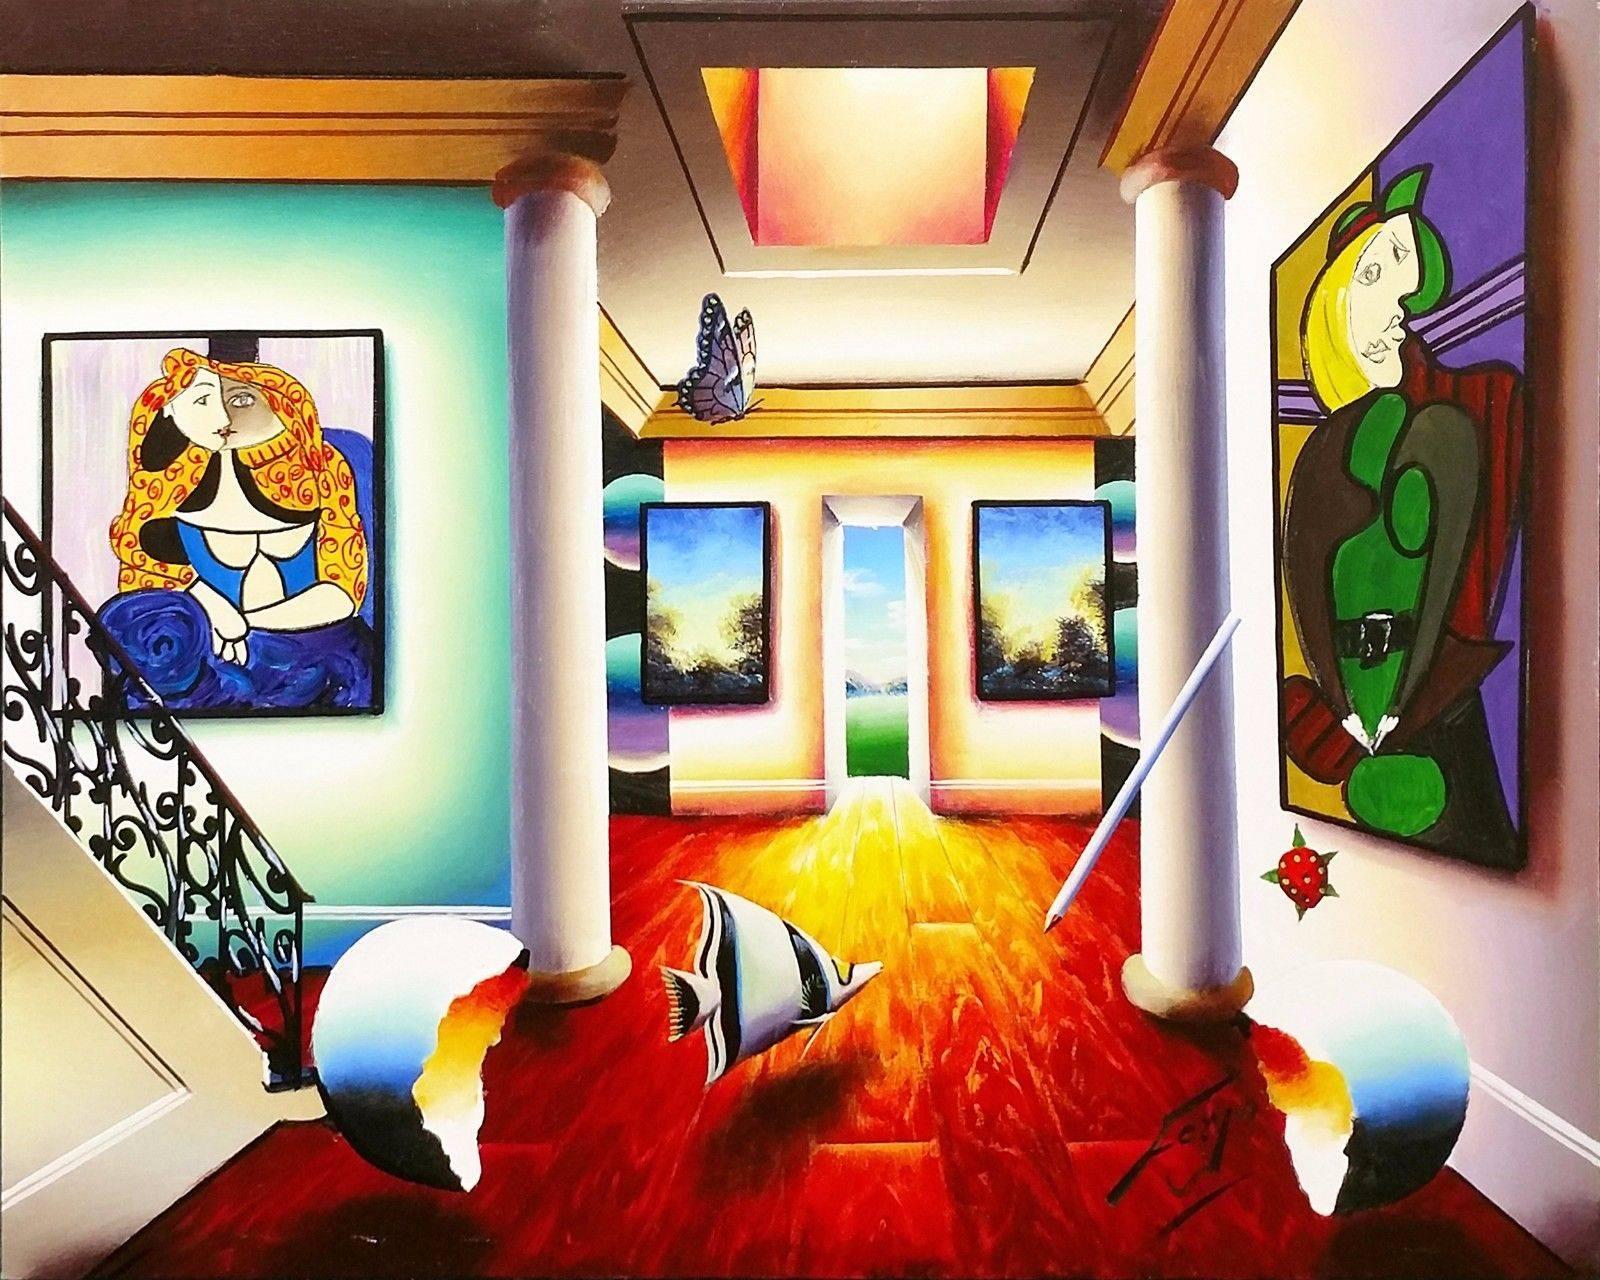 ROOM CUBIST ROOM (PICASSO)